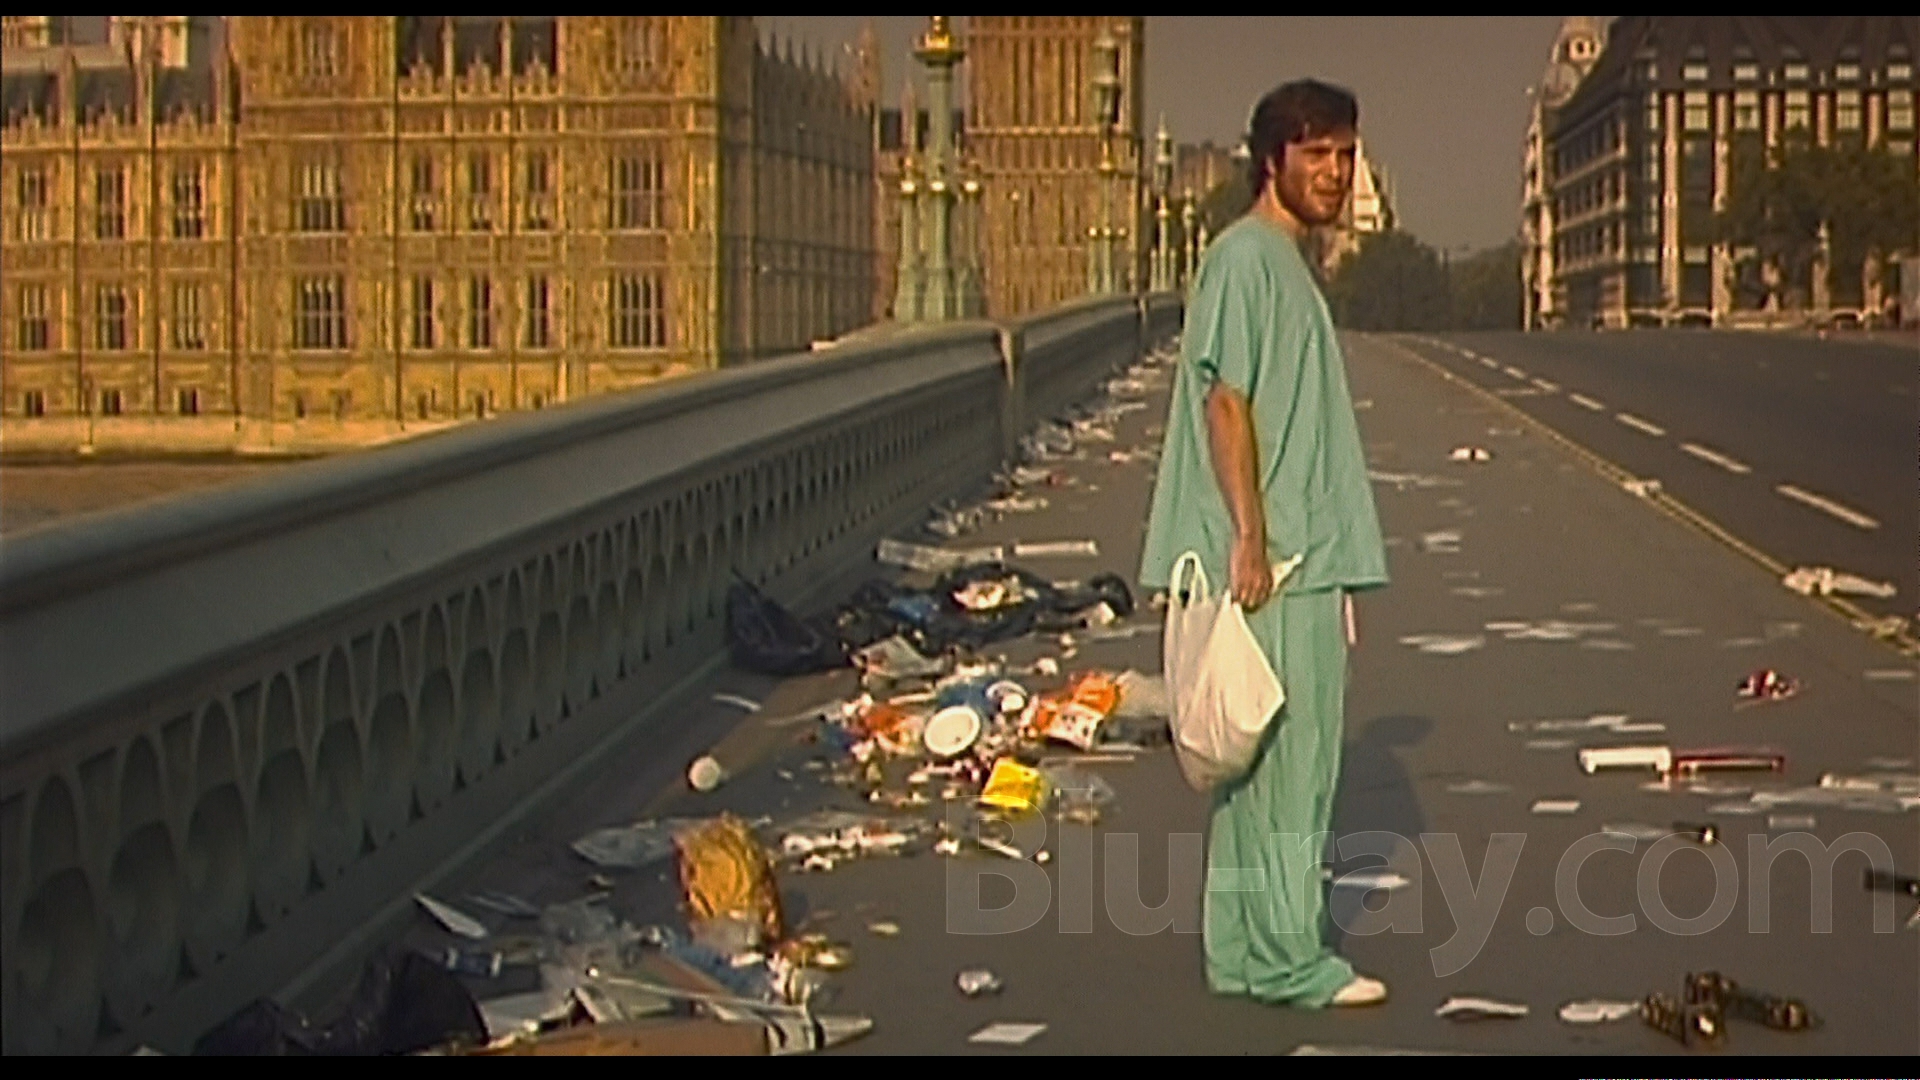 Amazing 28 Days Later Pictures & Backgrounds